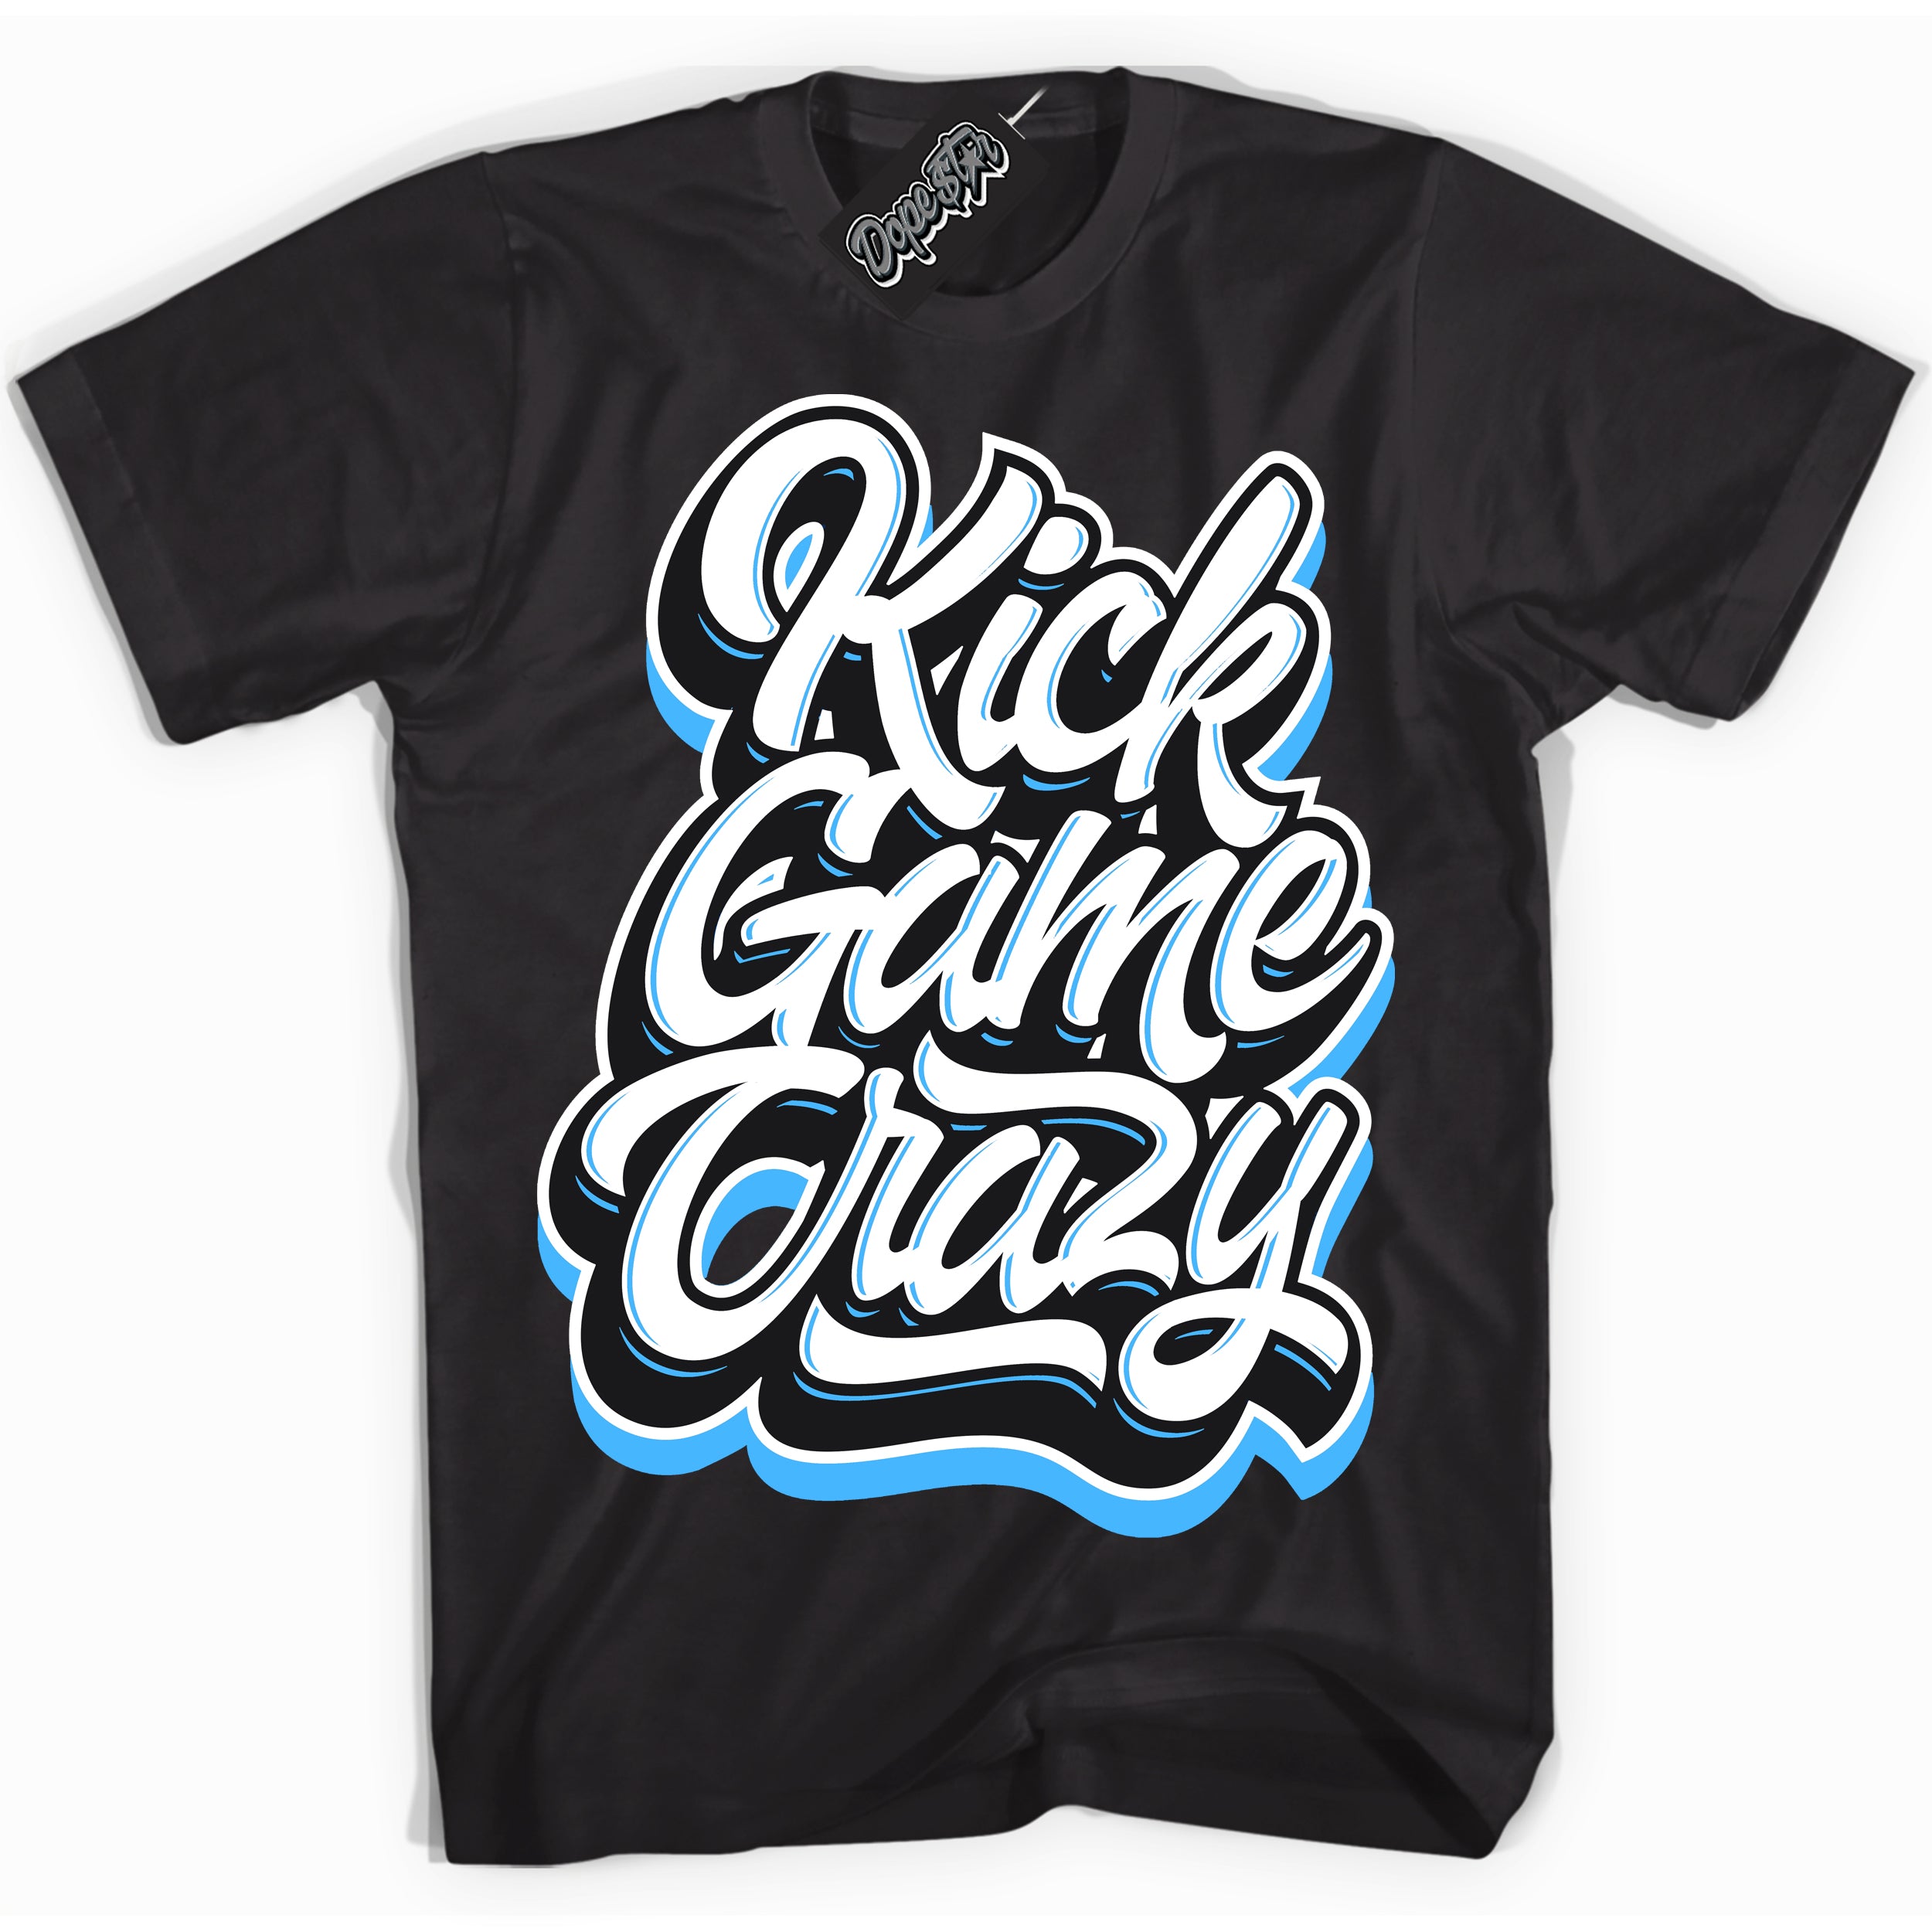 Cool Black graphic tee with “ Kick Game Crazy ” design, that perfectly matches Powder Blue 9s sneakers 